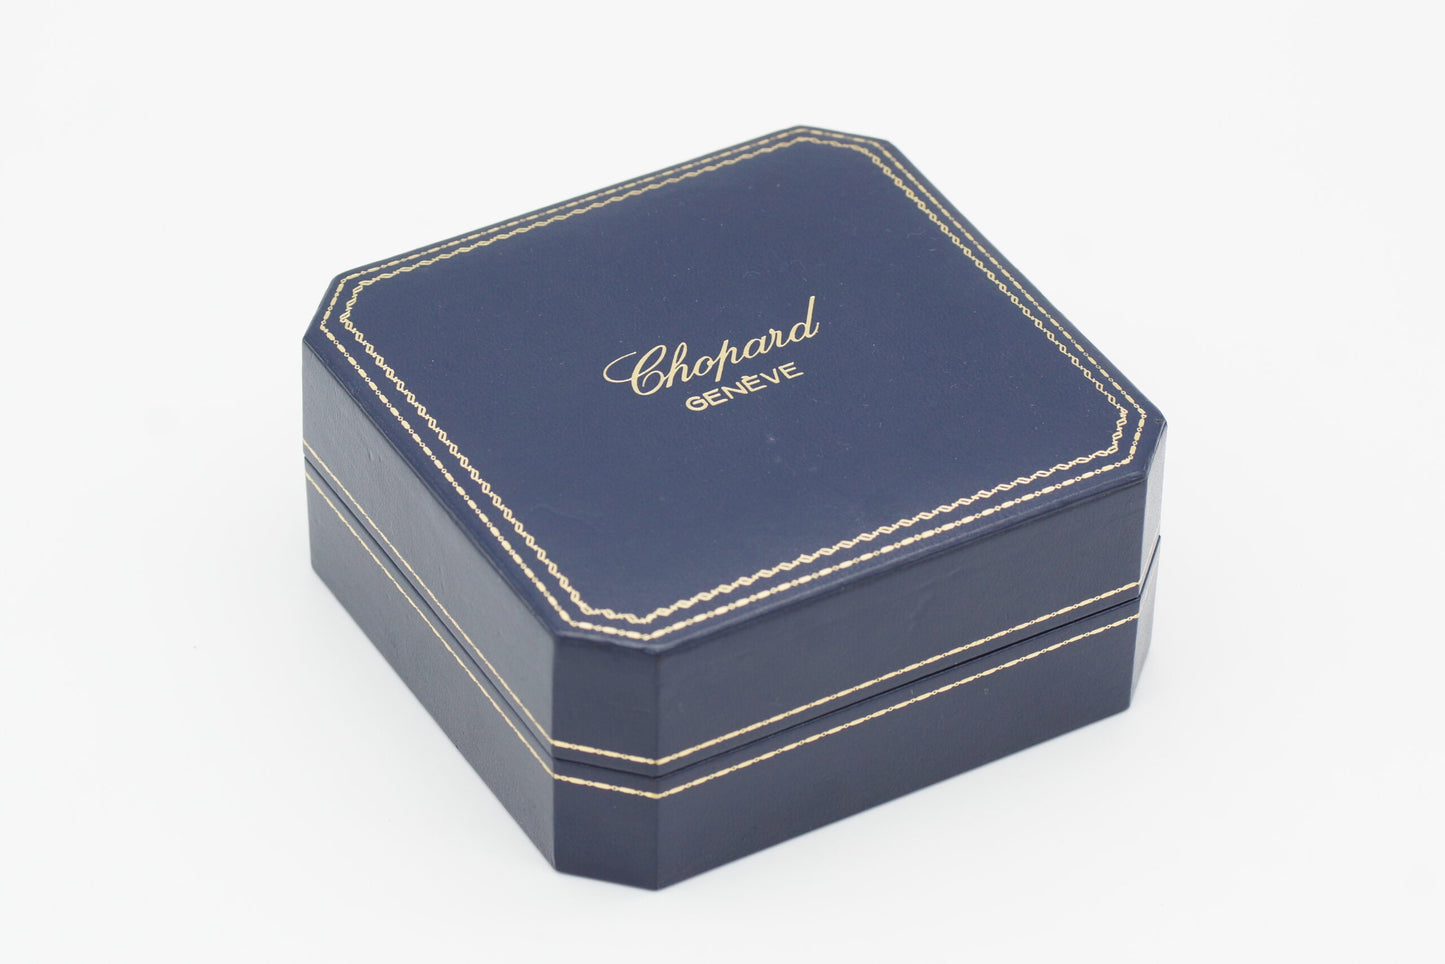 Chopard St. Moritz 8300 Automatic 37 mm Silver